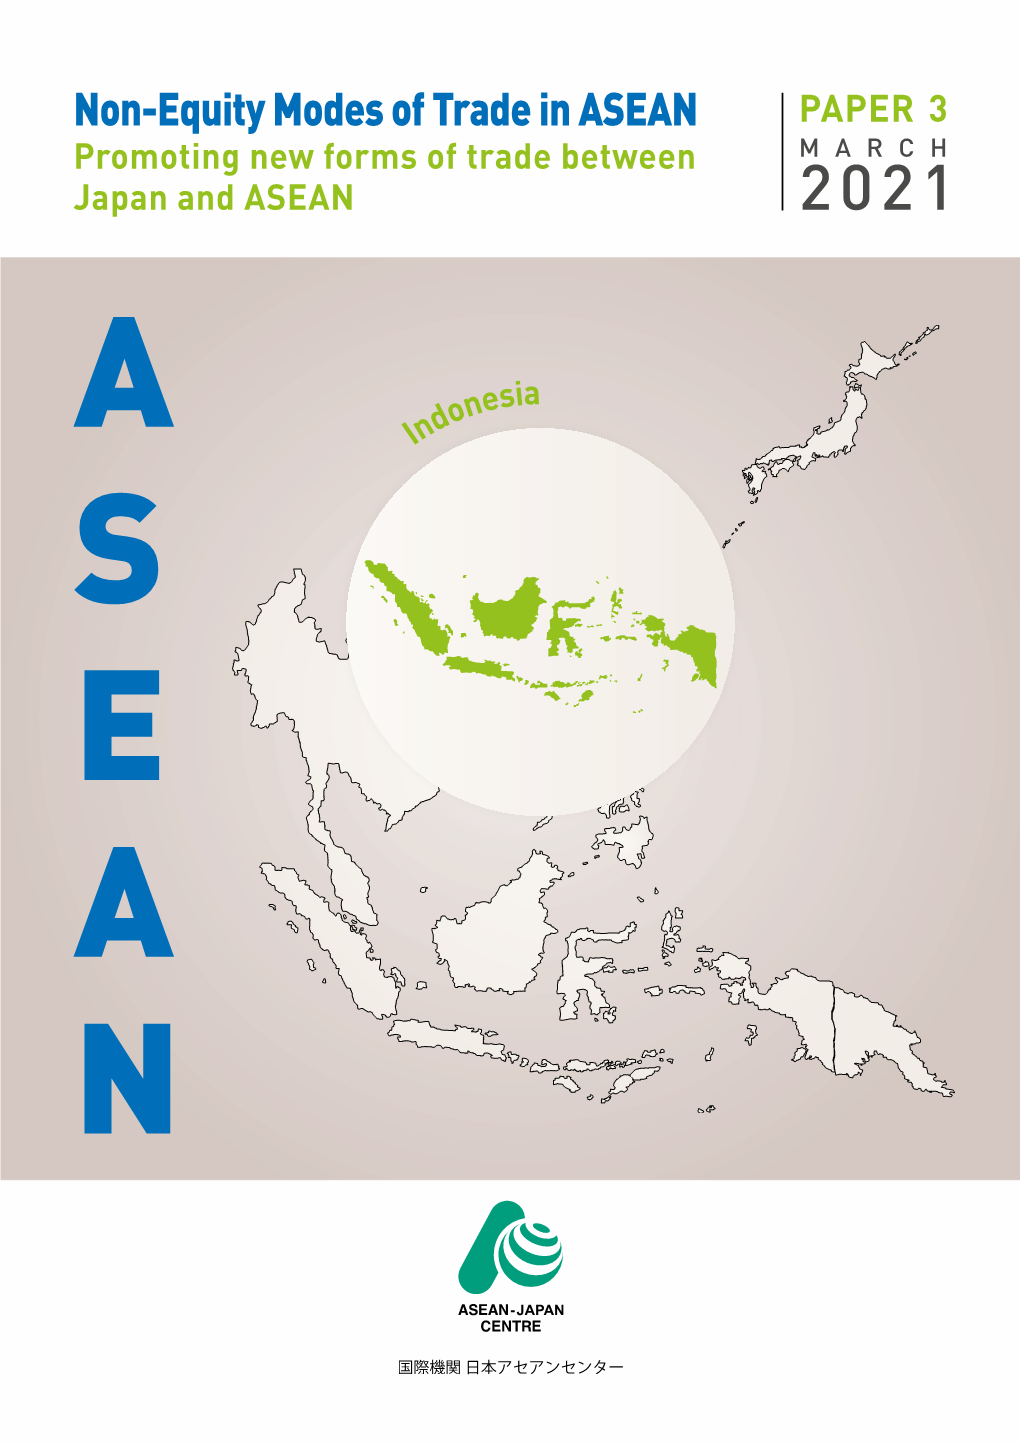 Onesia Promoting New Forms of Trade Between Japan and ASEAN